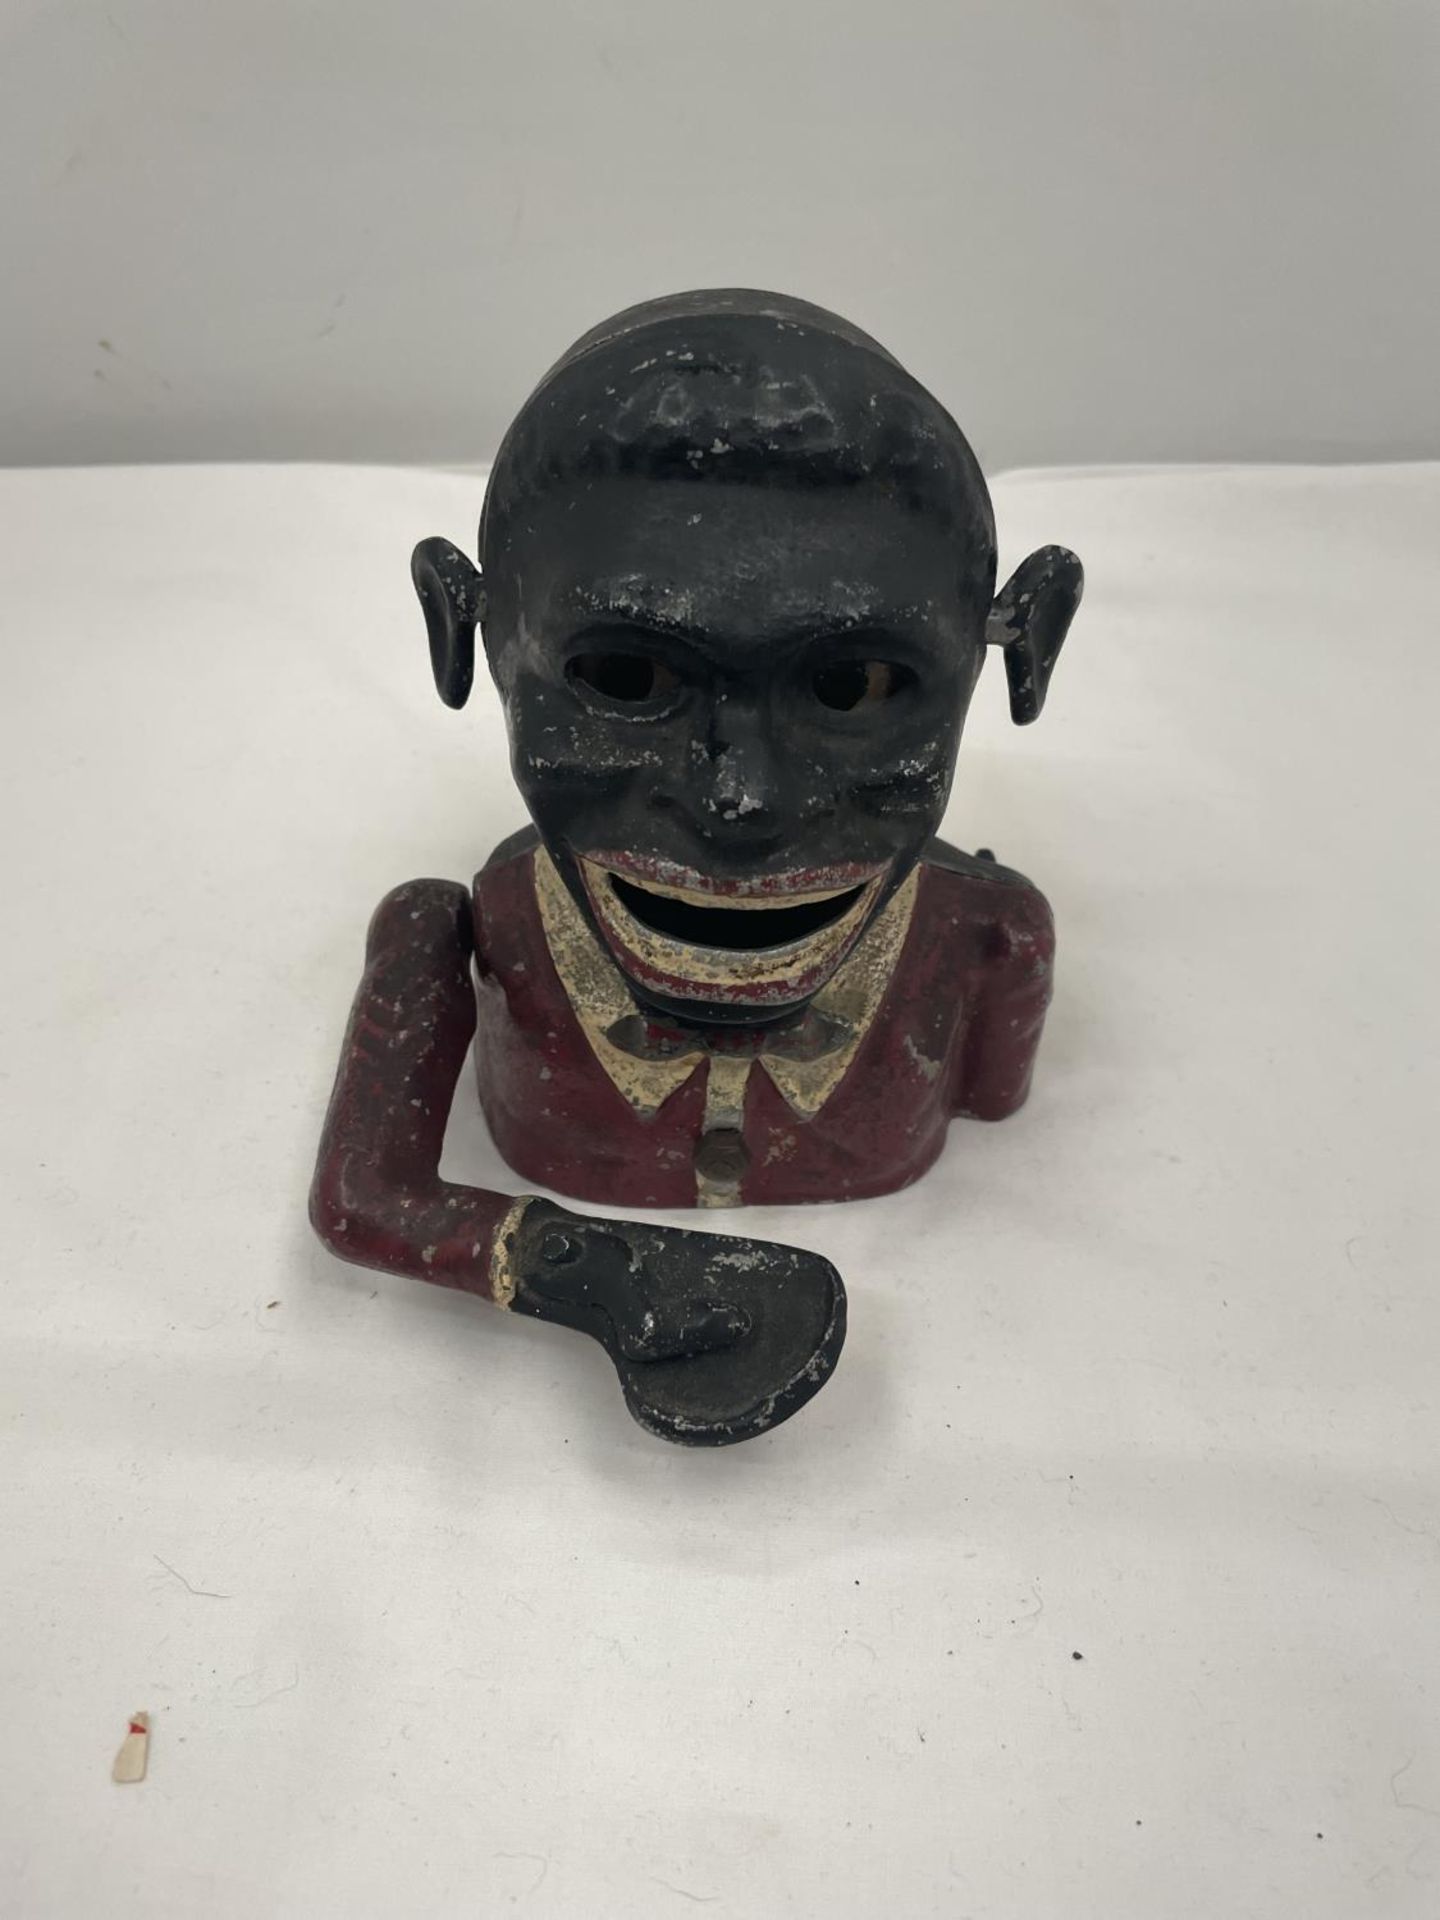 A VINTAGE 'JOLLY MAN' MONEY BOX IN WORKING ORDER